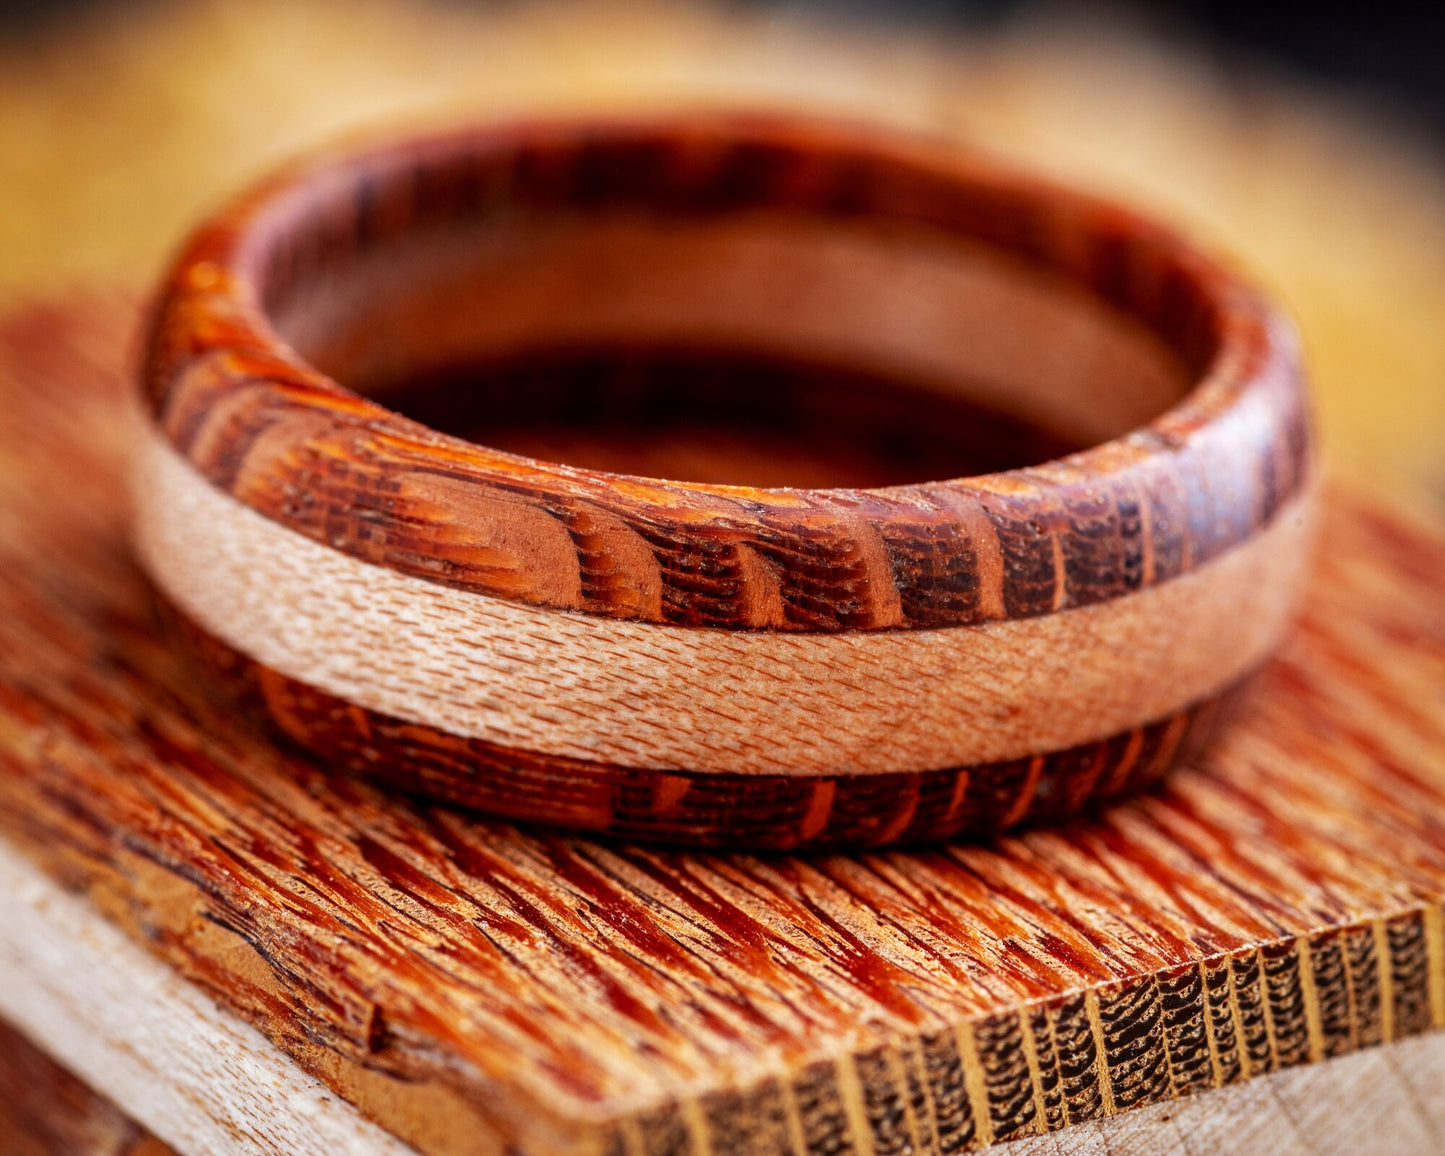 Hand Turned Wooden Ring - Laminated Leopardwood & Curly Maple